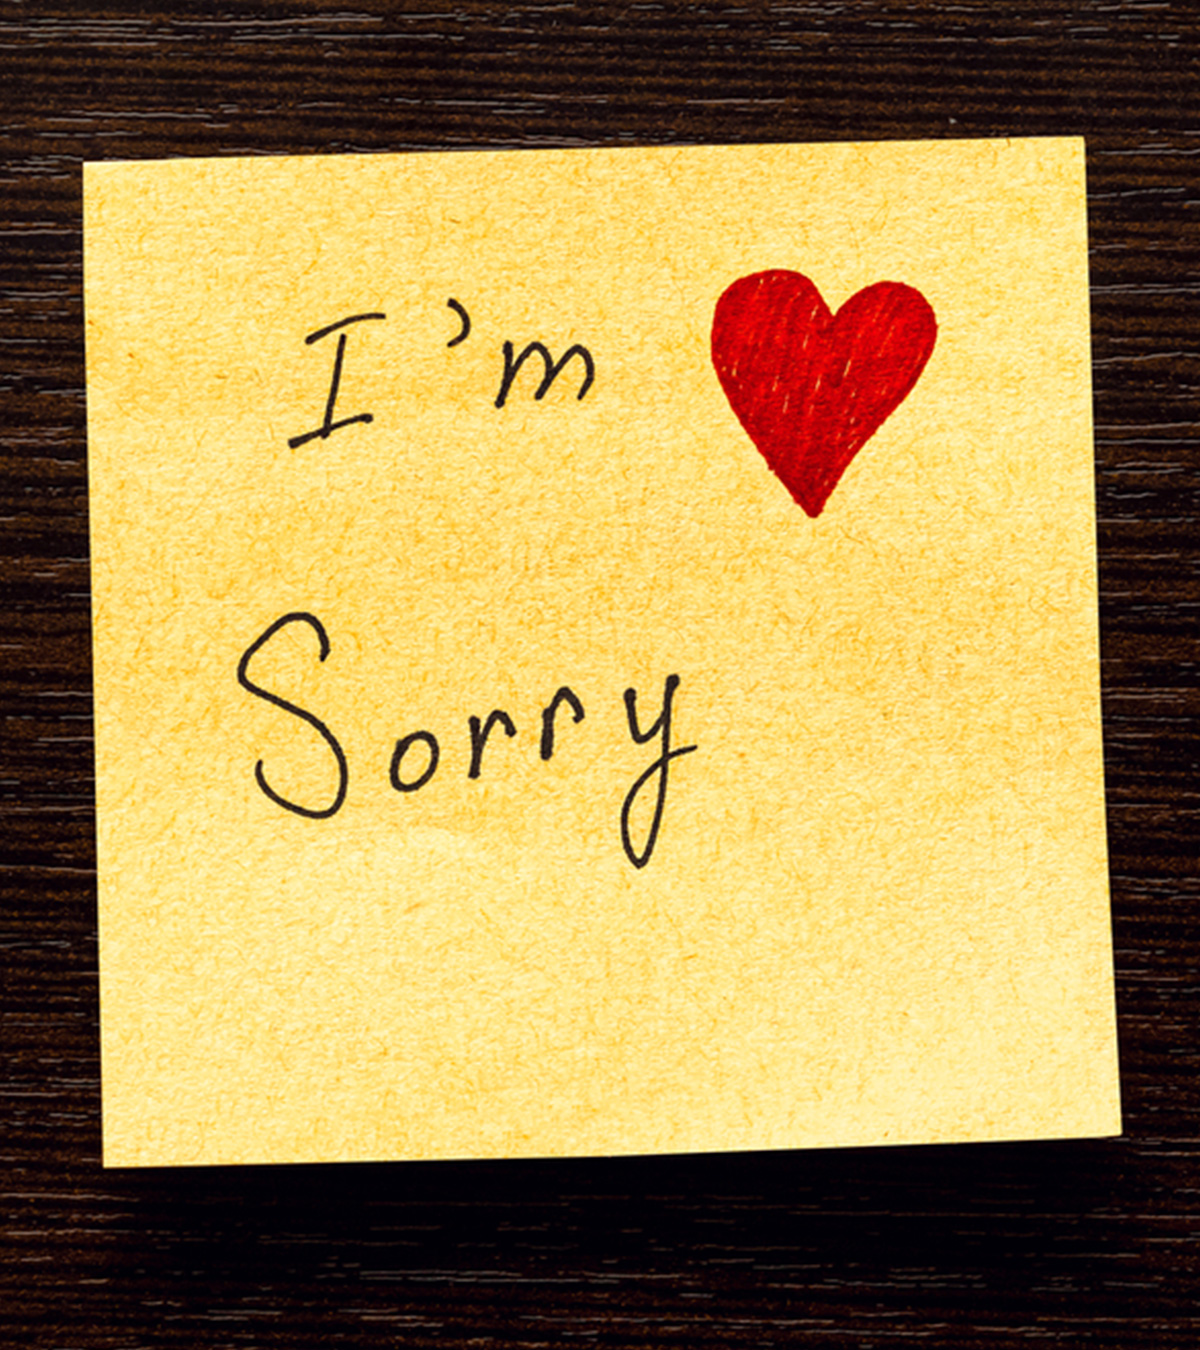 How To Apologize To Your Girlfriend: 24 Simple Ways